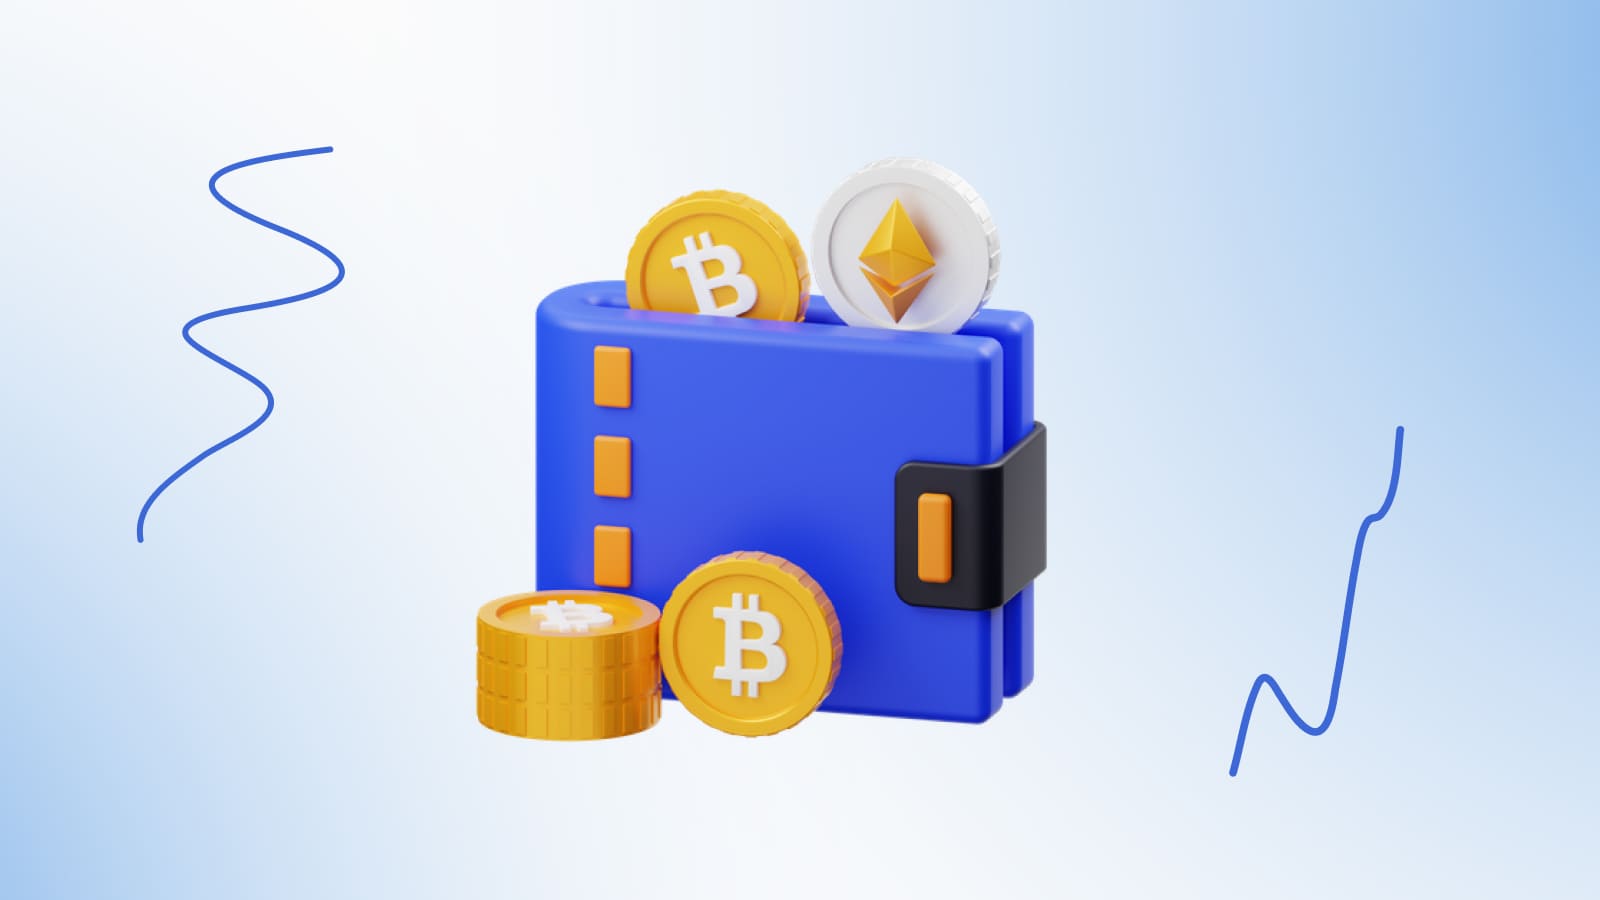 The first thing you need to do if you decide to use cryptocurrency is to choose a convenient and secure crypto wallet.